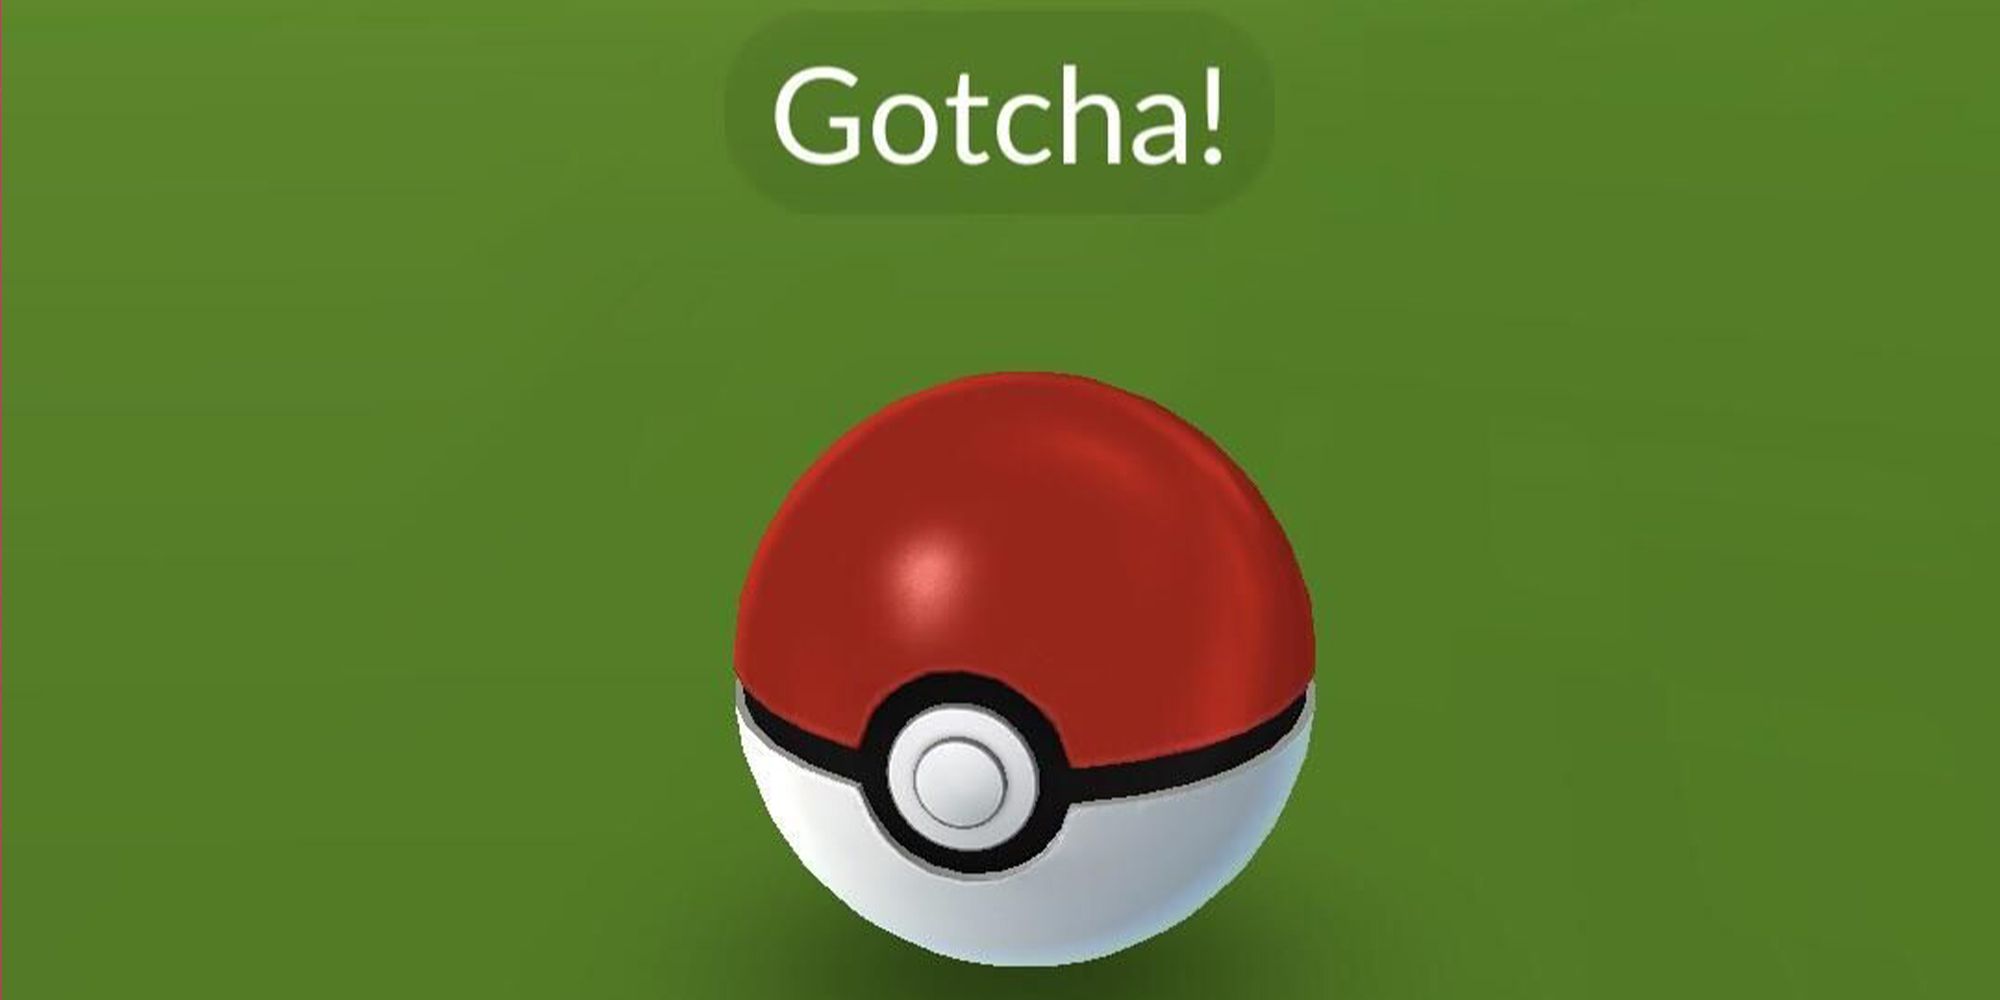 A close-up image of a Poké Ball with the word 